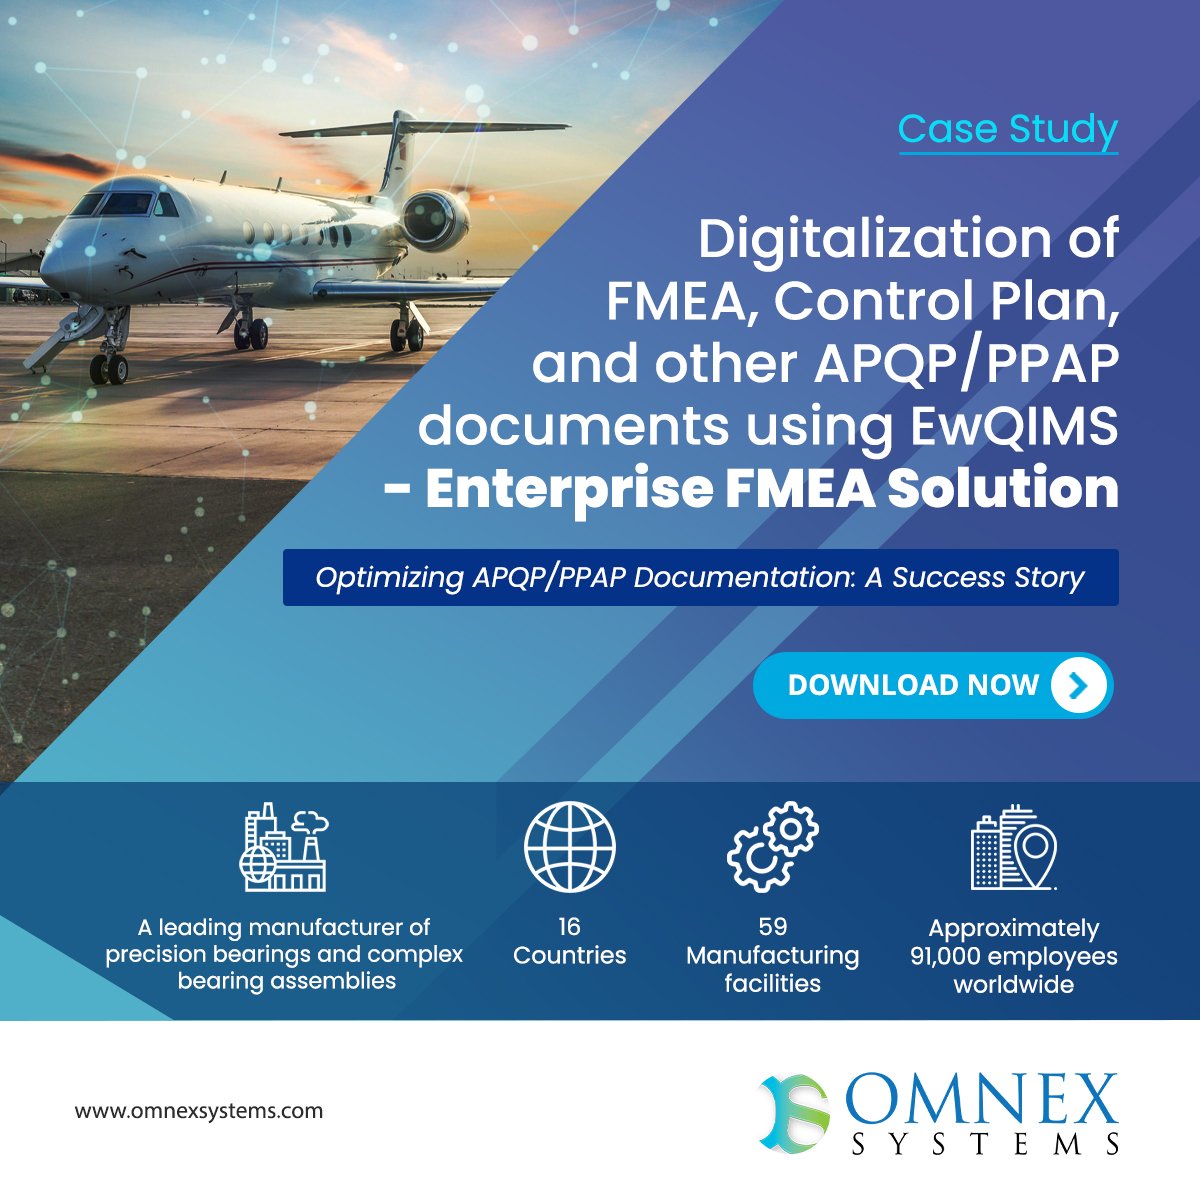 Discover how a global leader in high-precision bearings overcame APQP/PPAP documentation challenges with Omnex Systems' Enterprise FMEA Software.
Learn More:
hubs.ly/Q02sG44t0
 
#DigitalFMEA #EwQIMS #APQP #PPAP #QualityManagement #EnterpriseSolutions #ProcessImprovement